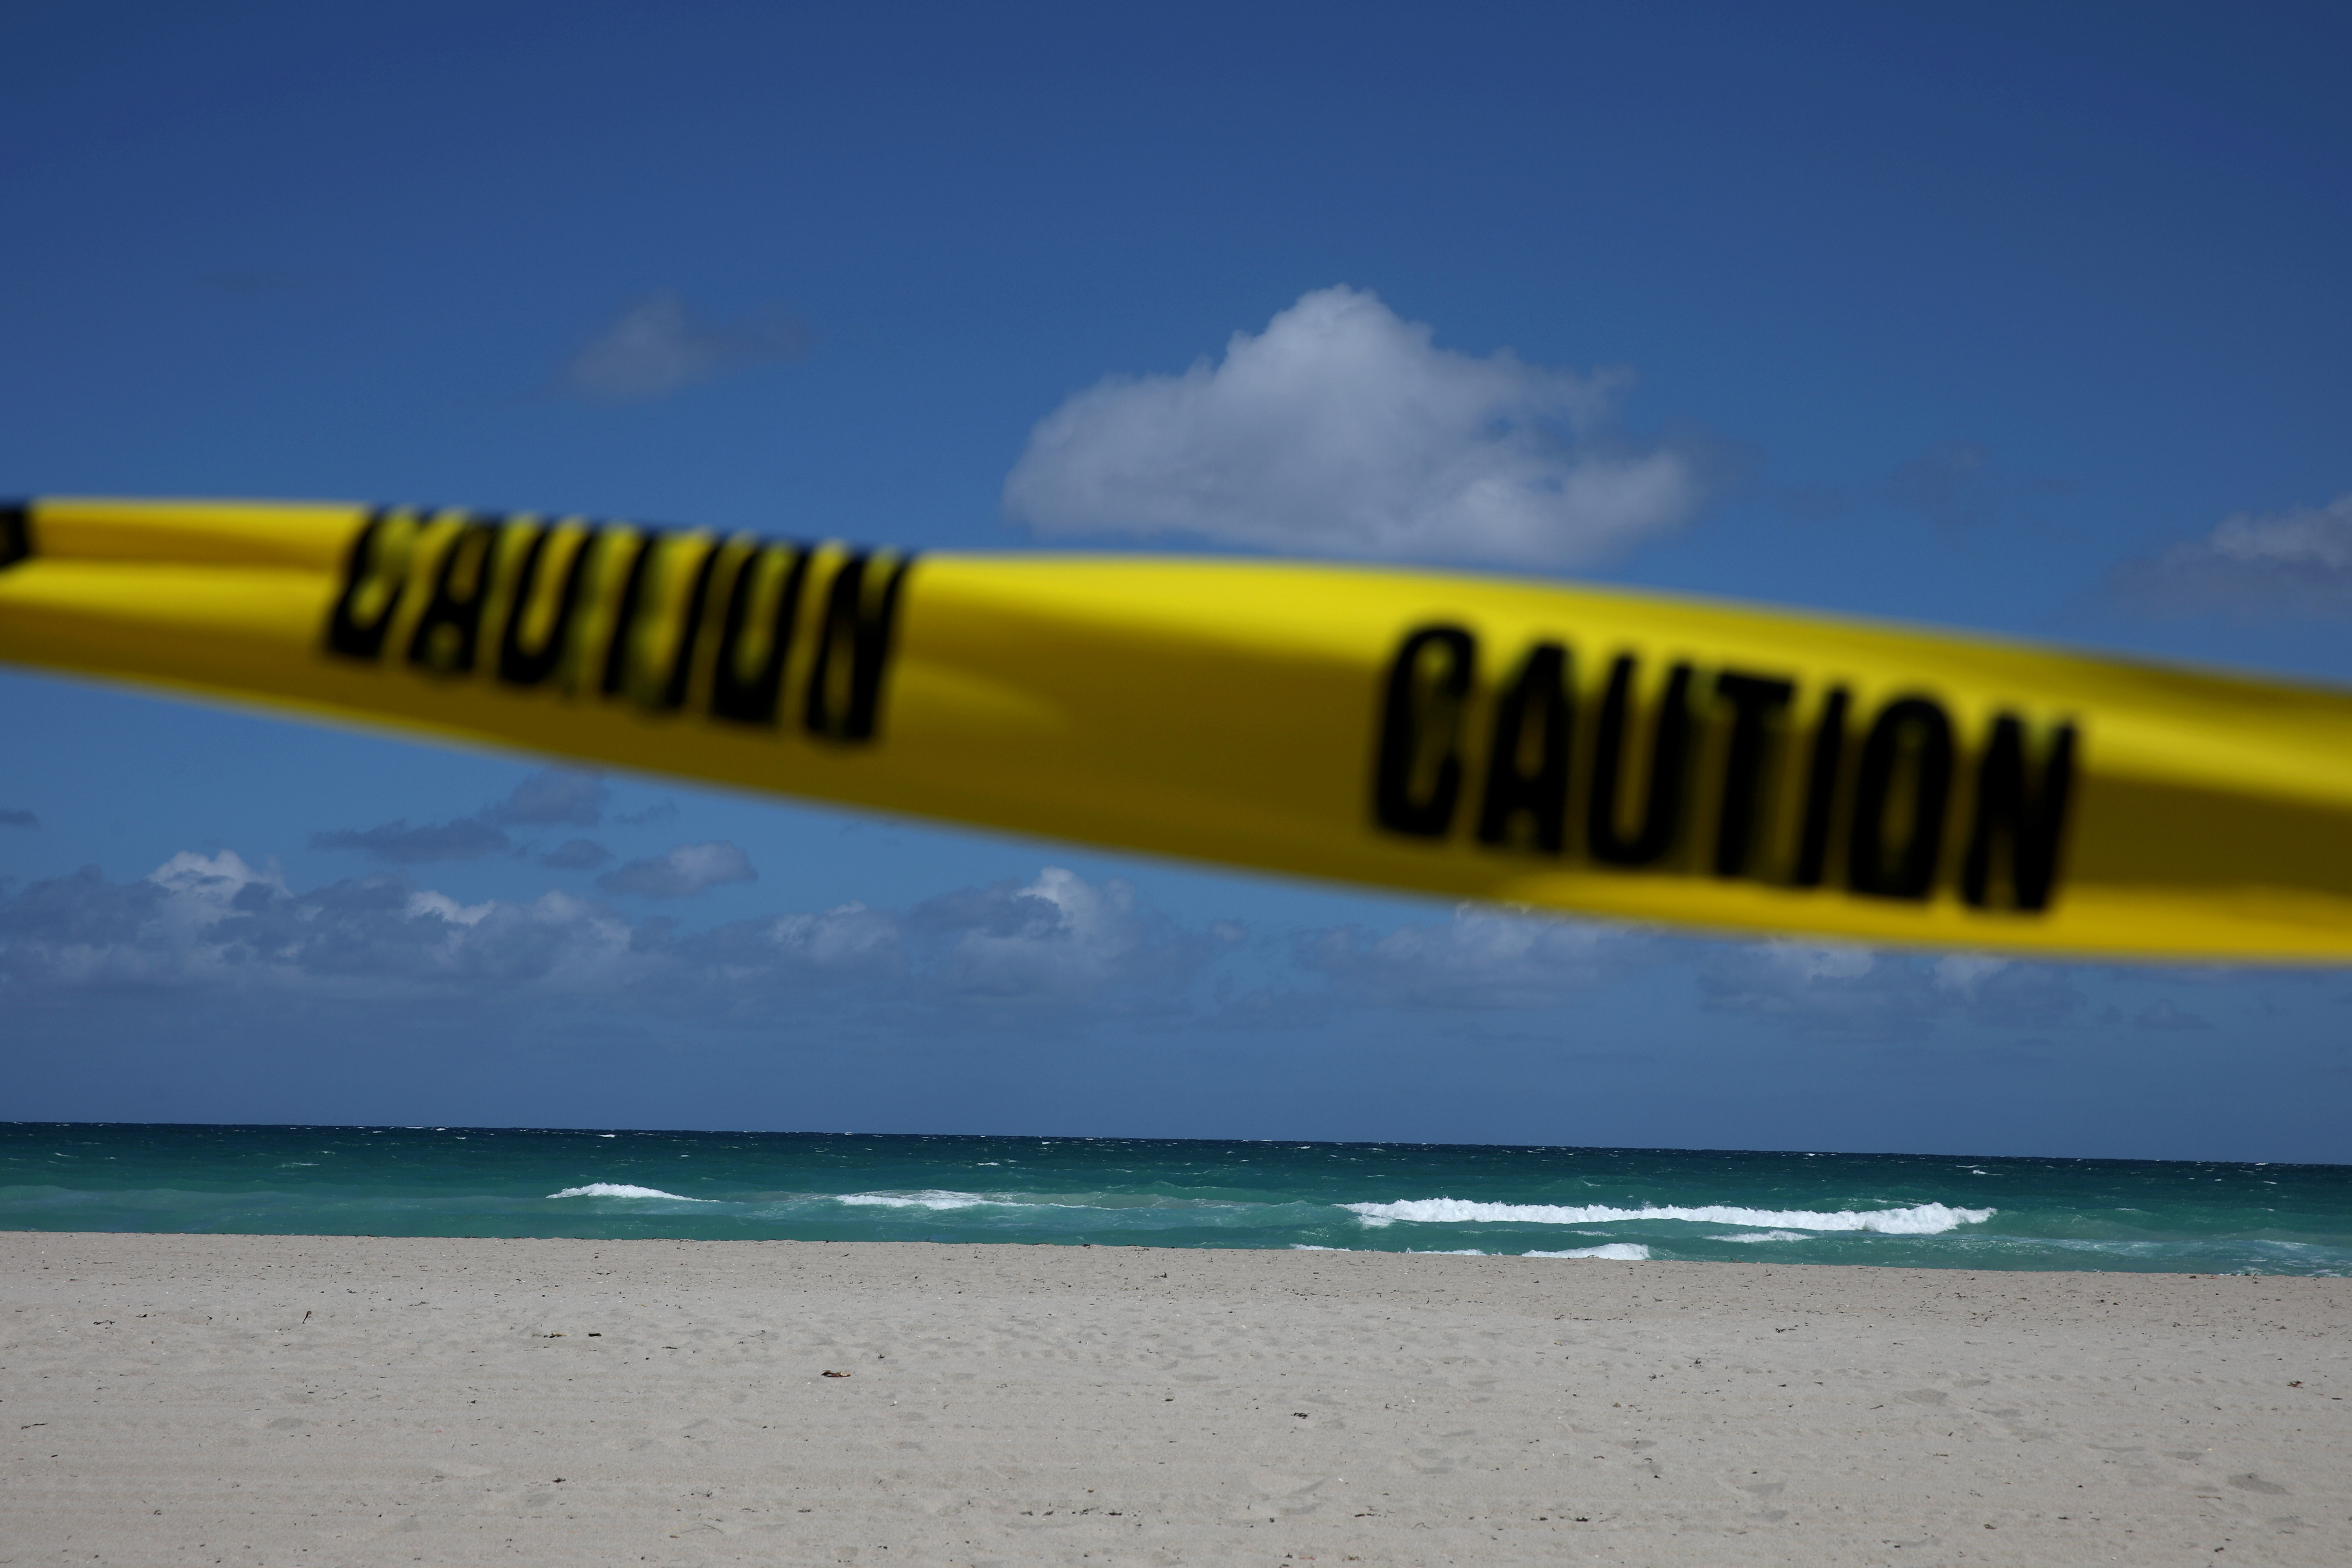 Police investigation area on the beach of Miami Beach (Reuters)